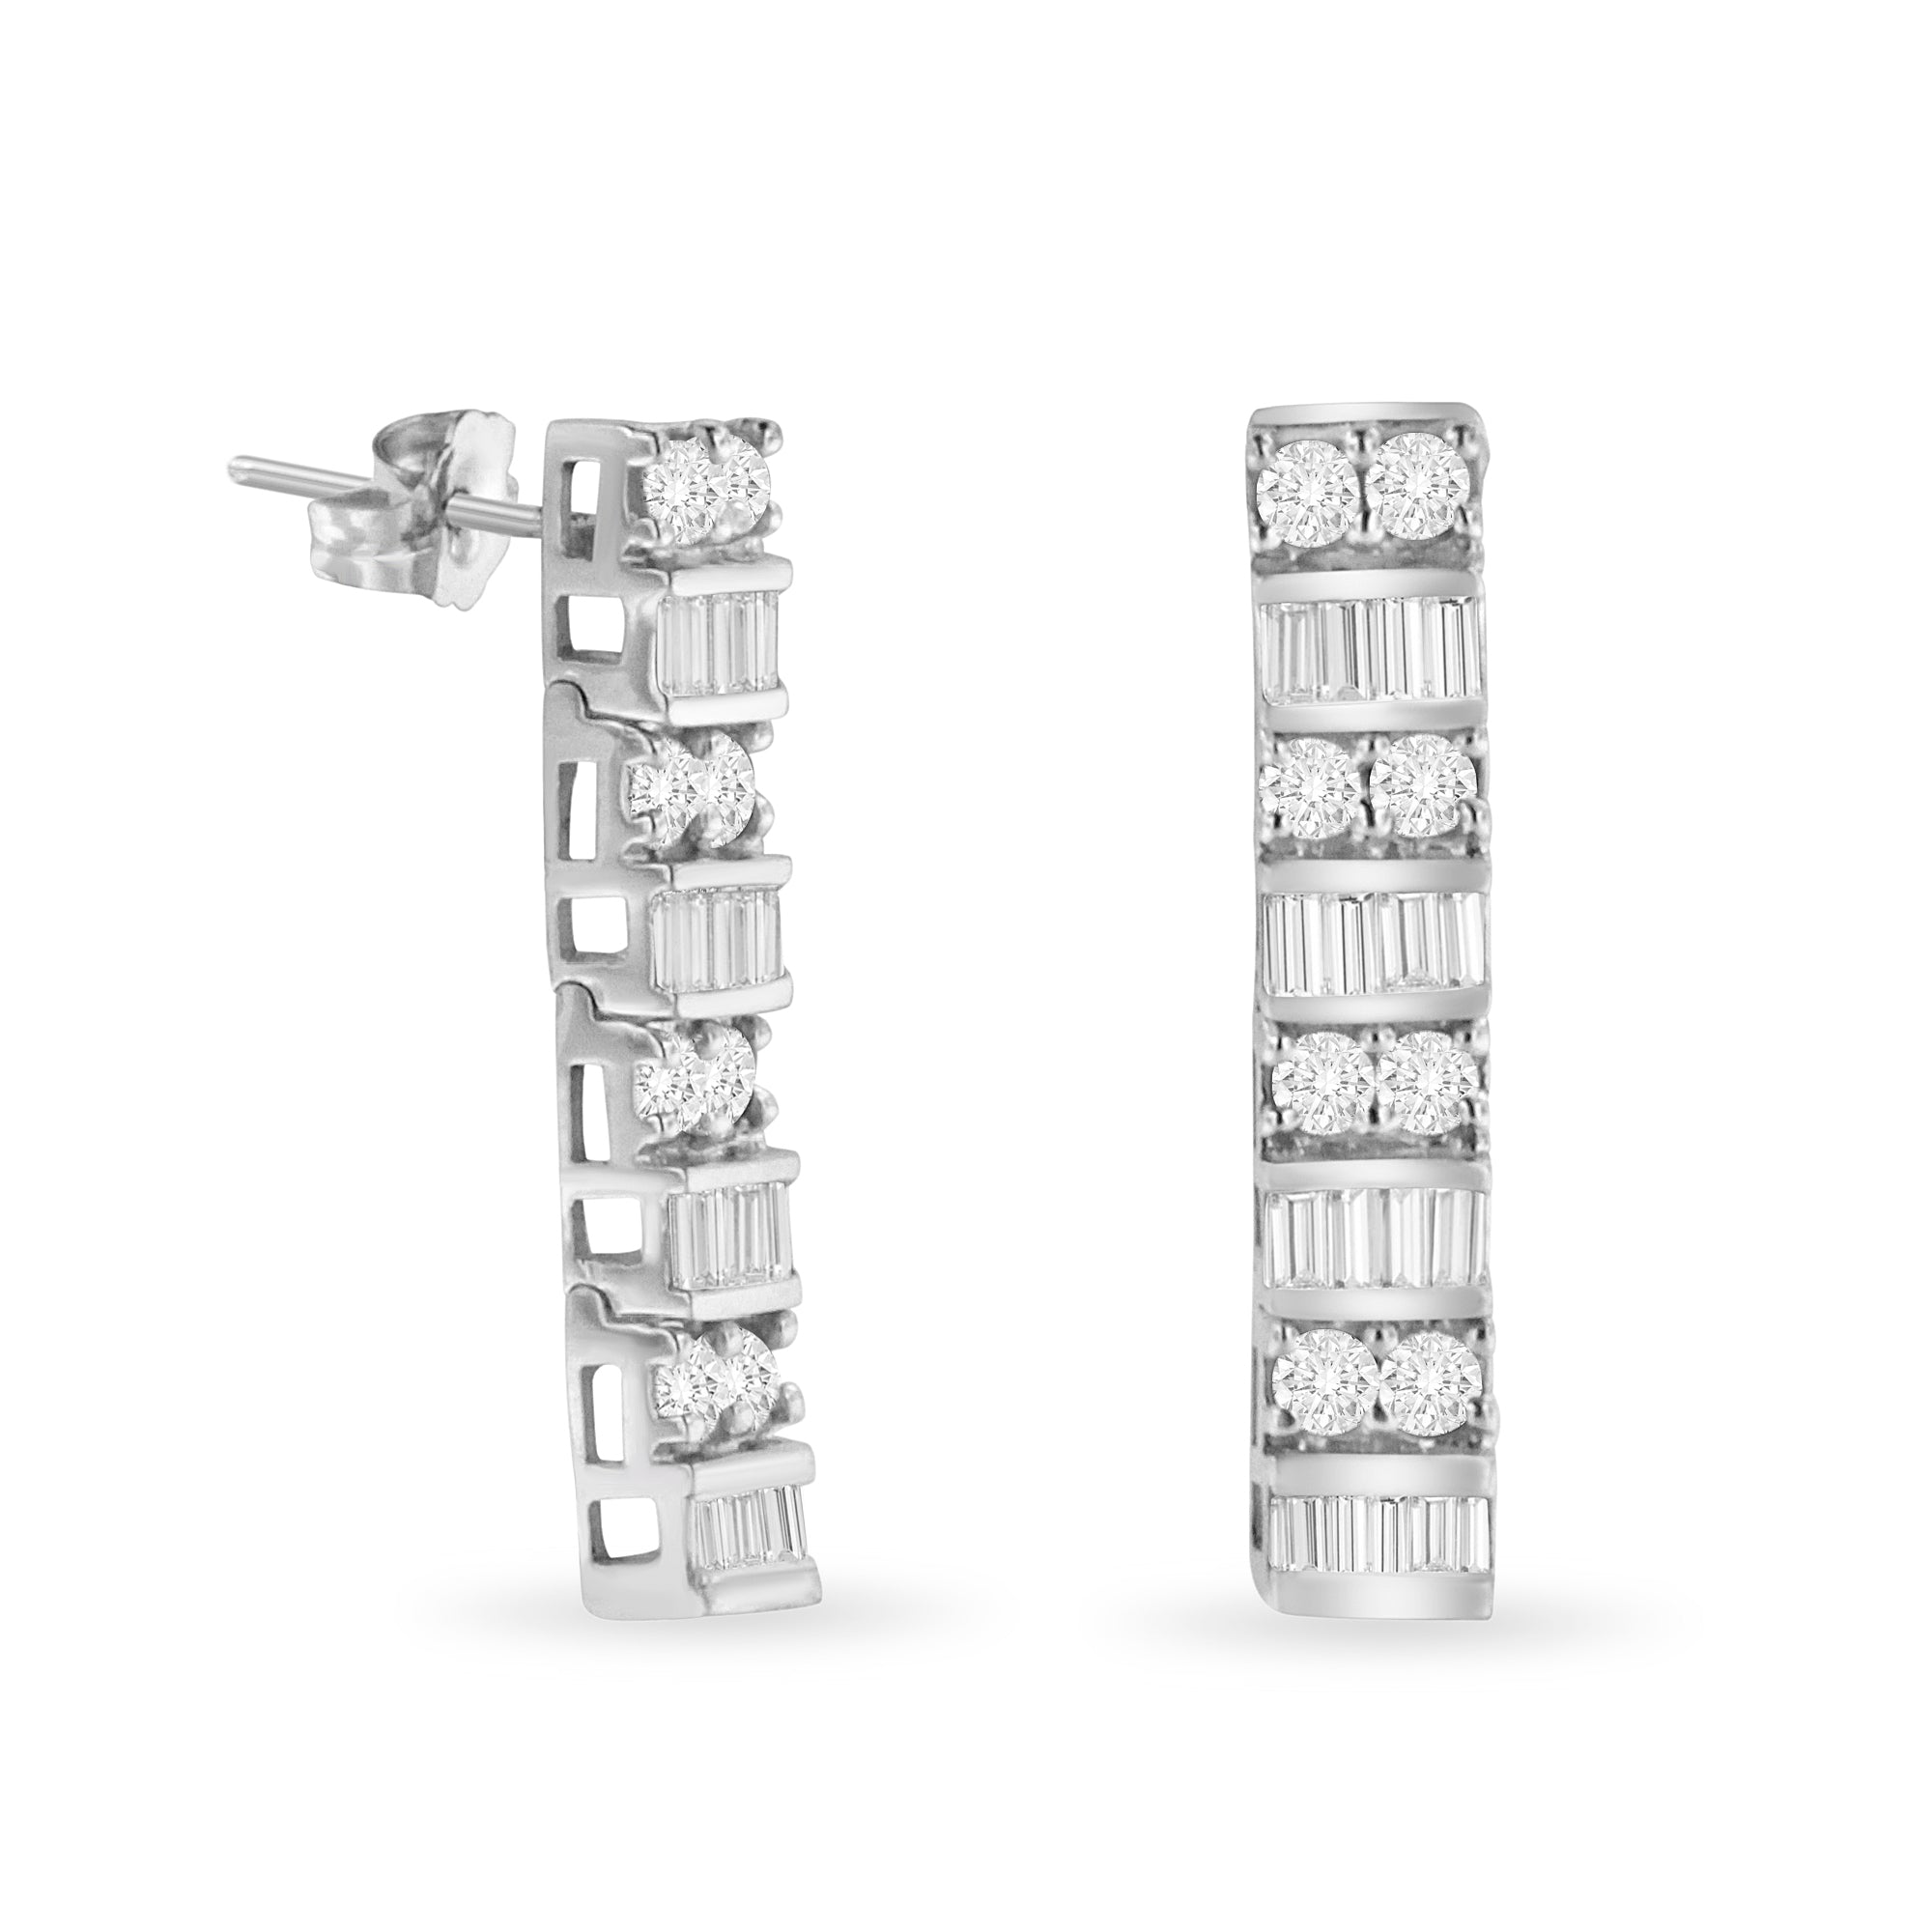 14K White Gold 1 1/3 cttw Round And Baguette Cut Diamond Earrings